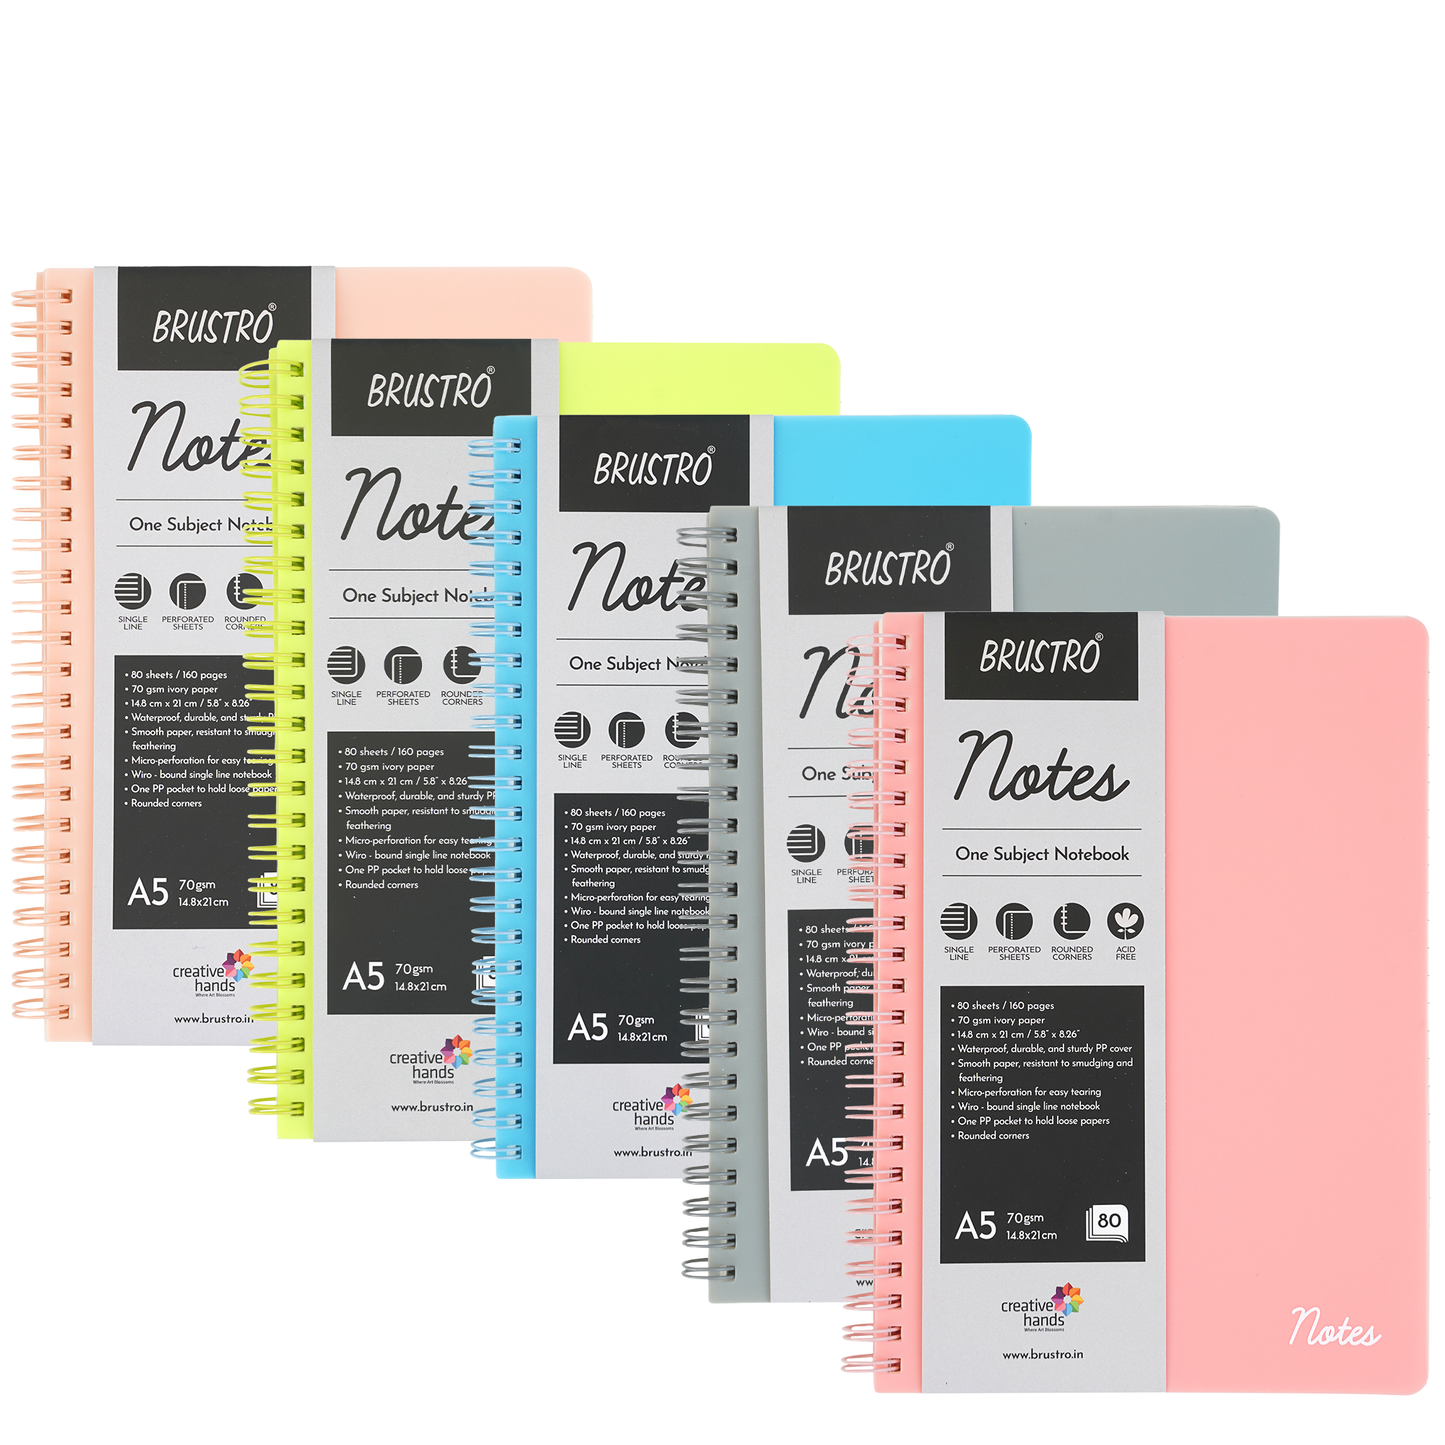 BRUSTRO Notes A5 Size,1 Subject Ruled Notebooks (Set of 5),80 sheets/160 pages,70 gsm ivory paper, Caramel/Aqua/Lime/Blush/Slate Cover,